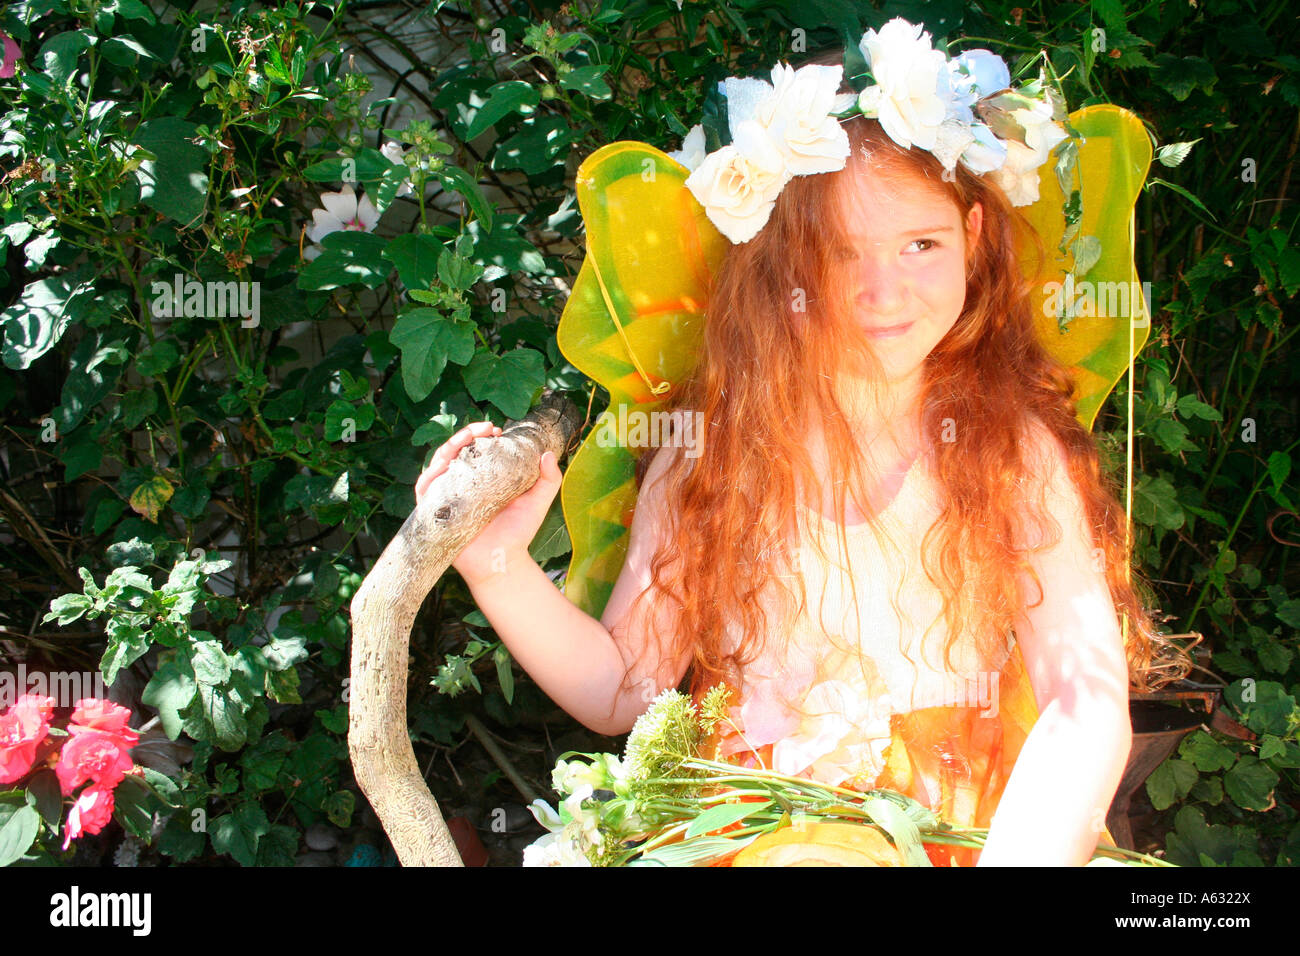 a beautiful young girl with long red hair Stock Photo